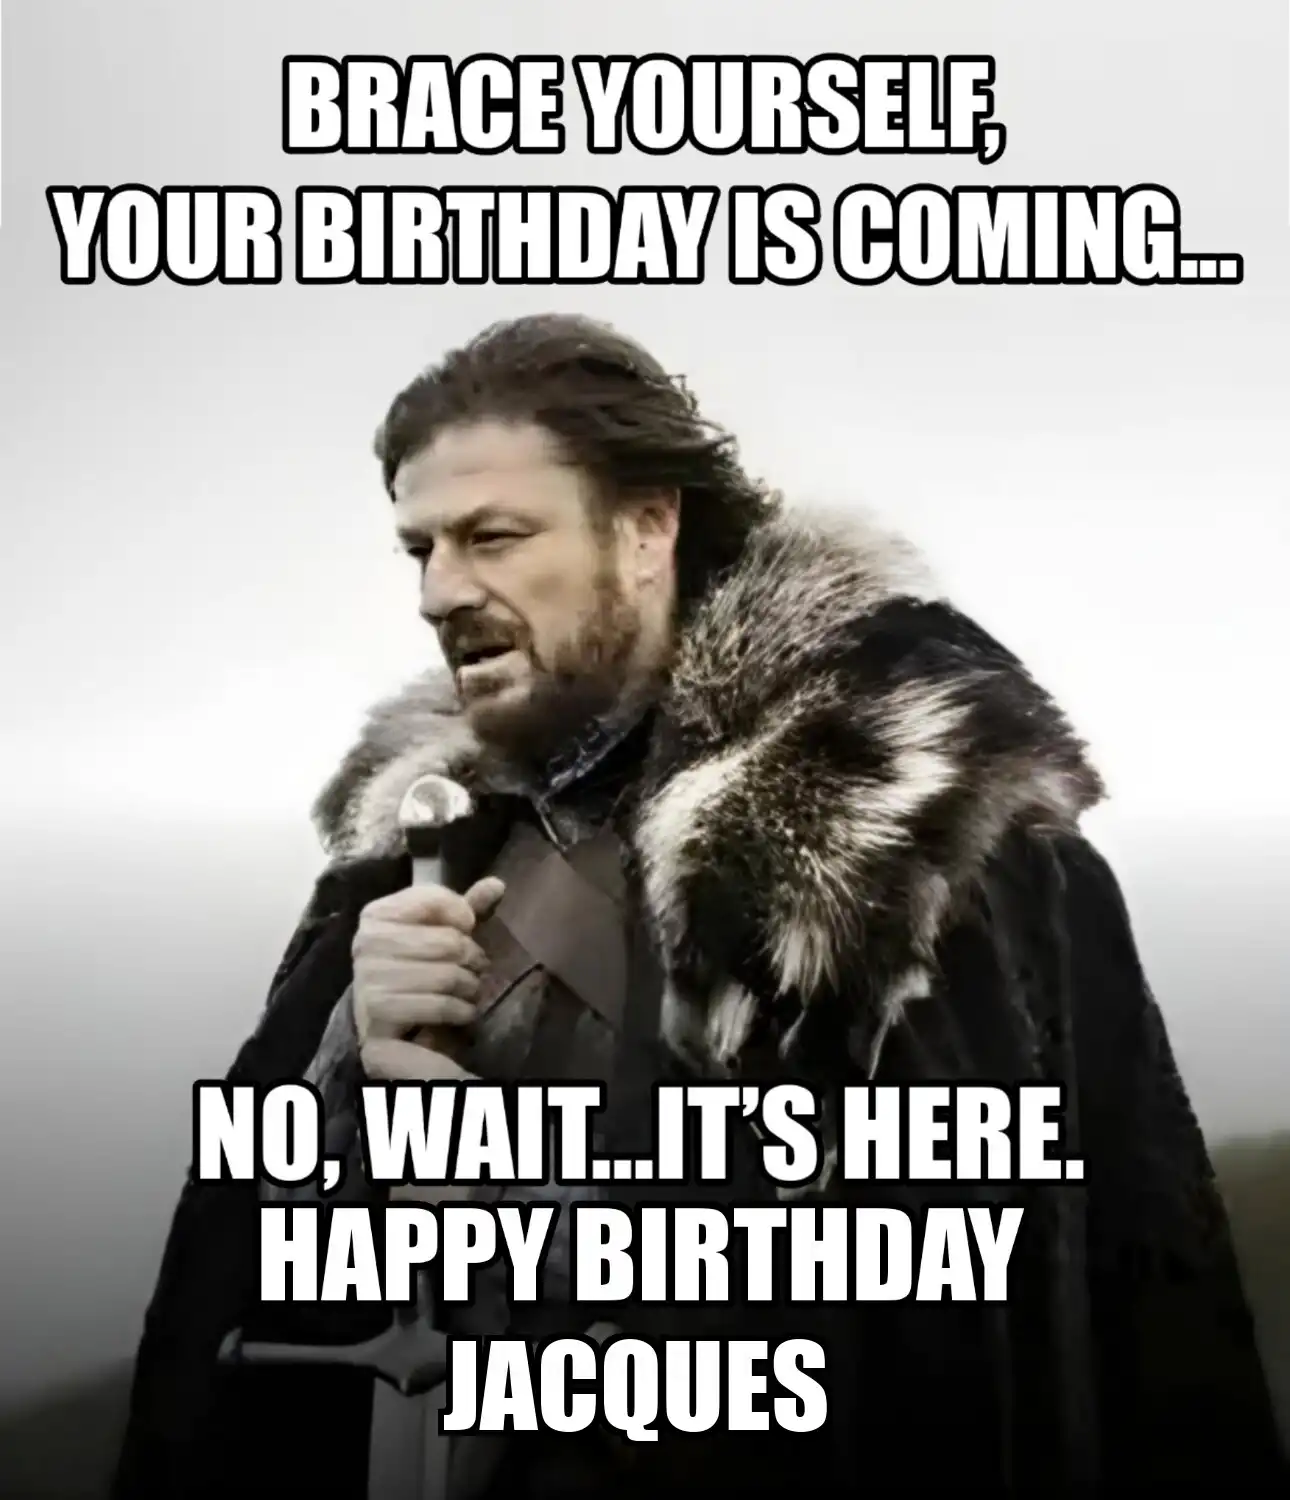 Happy Birthday Jacques Brace Yourself Your Birthday Is Coming Meme